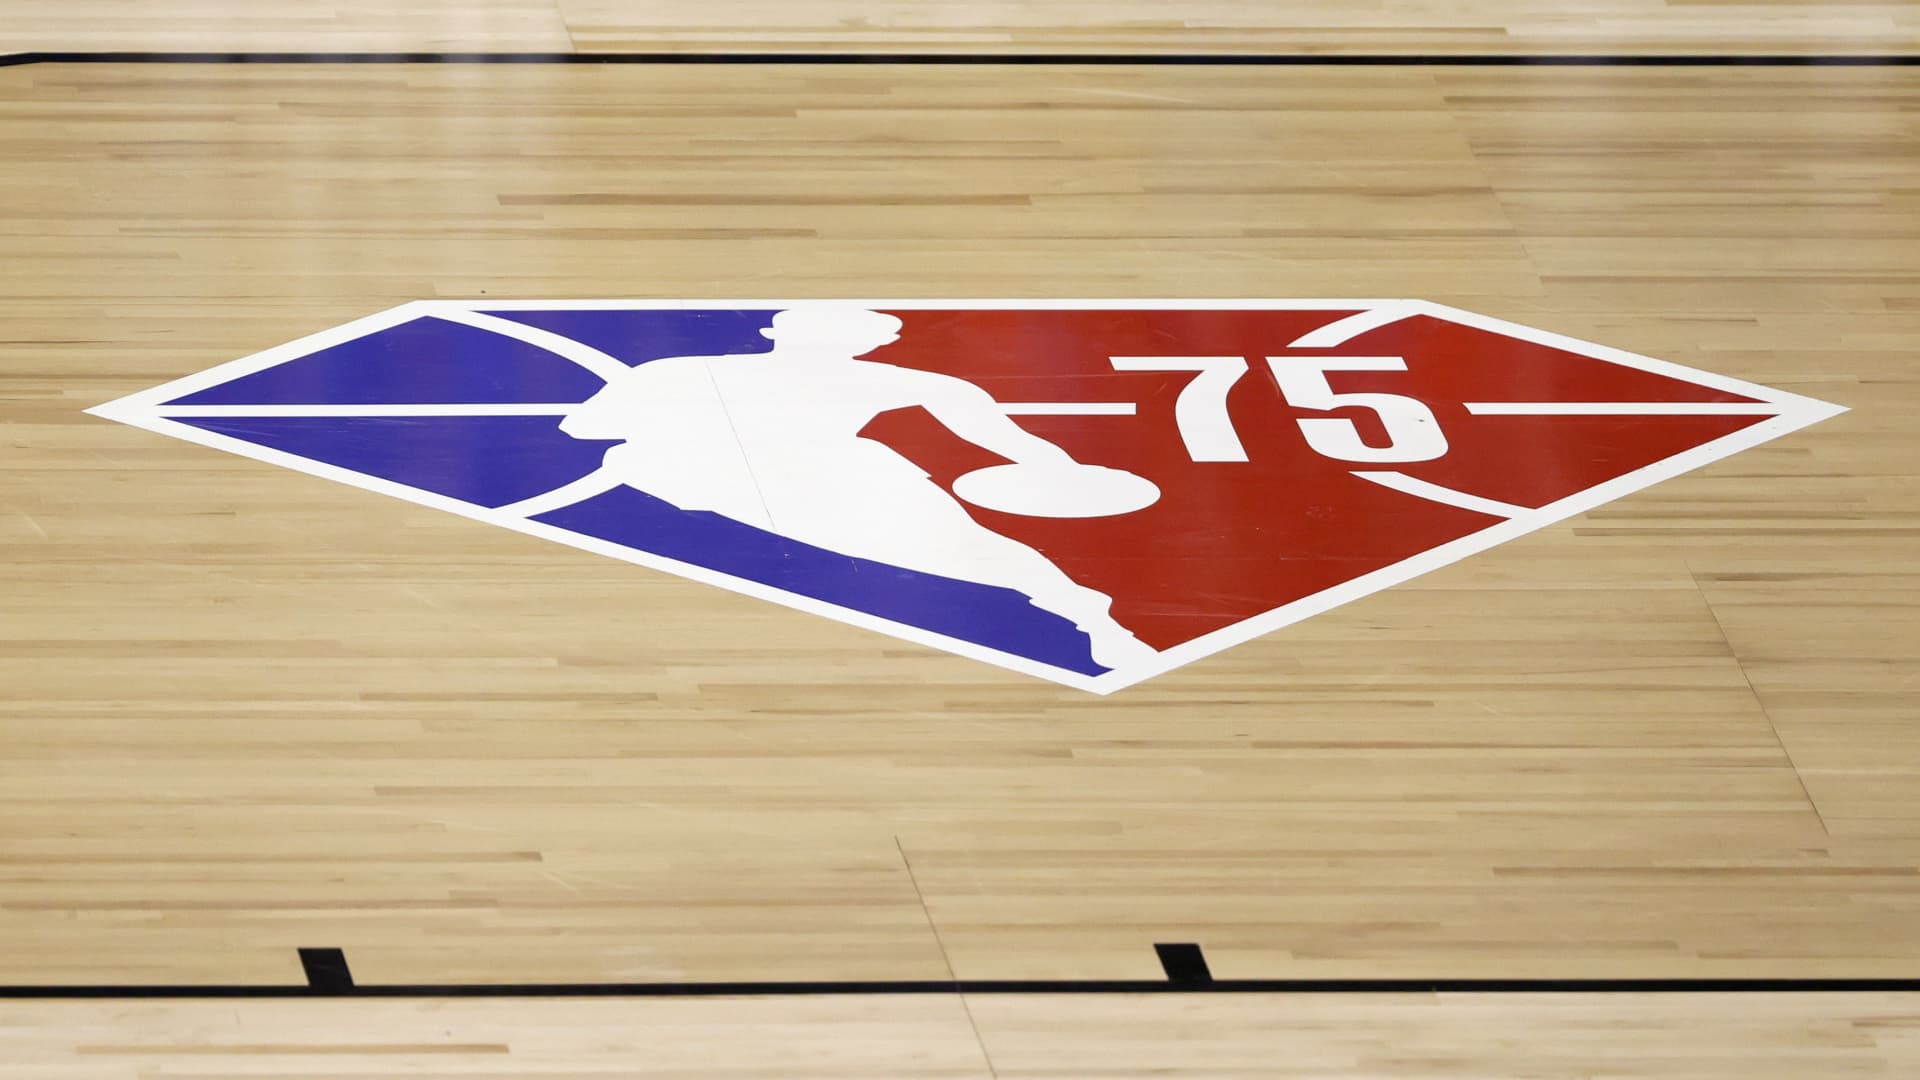 A diamond-themed logo commemorating the NBA's 75th anniversary is shown on the court during a game between the Oklahoma City Thunder and the Detroit Pistons during the 2021 NBA Summer League at the Thomas & Mack Center on August 8, 2021 in Las Vegas, Nevada.